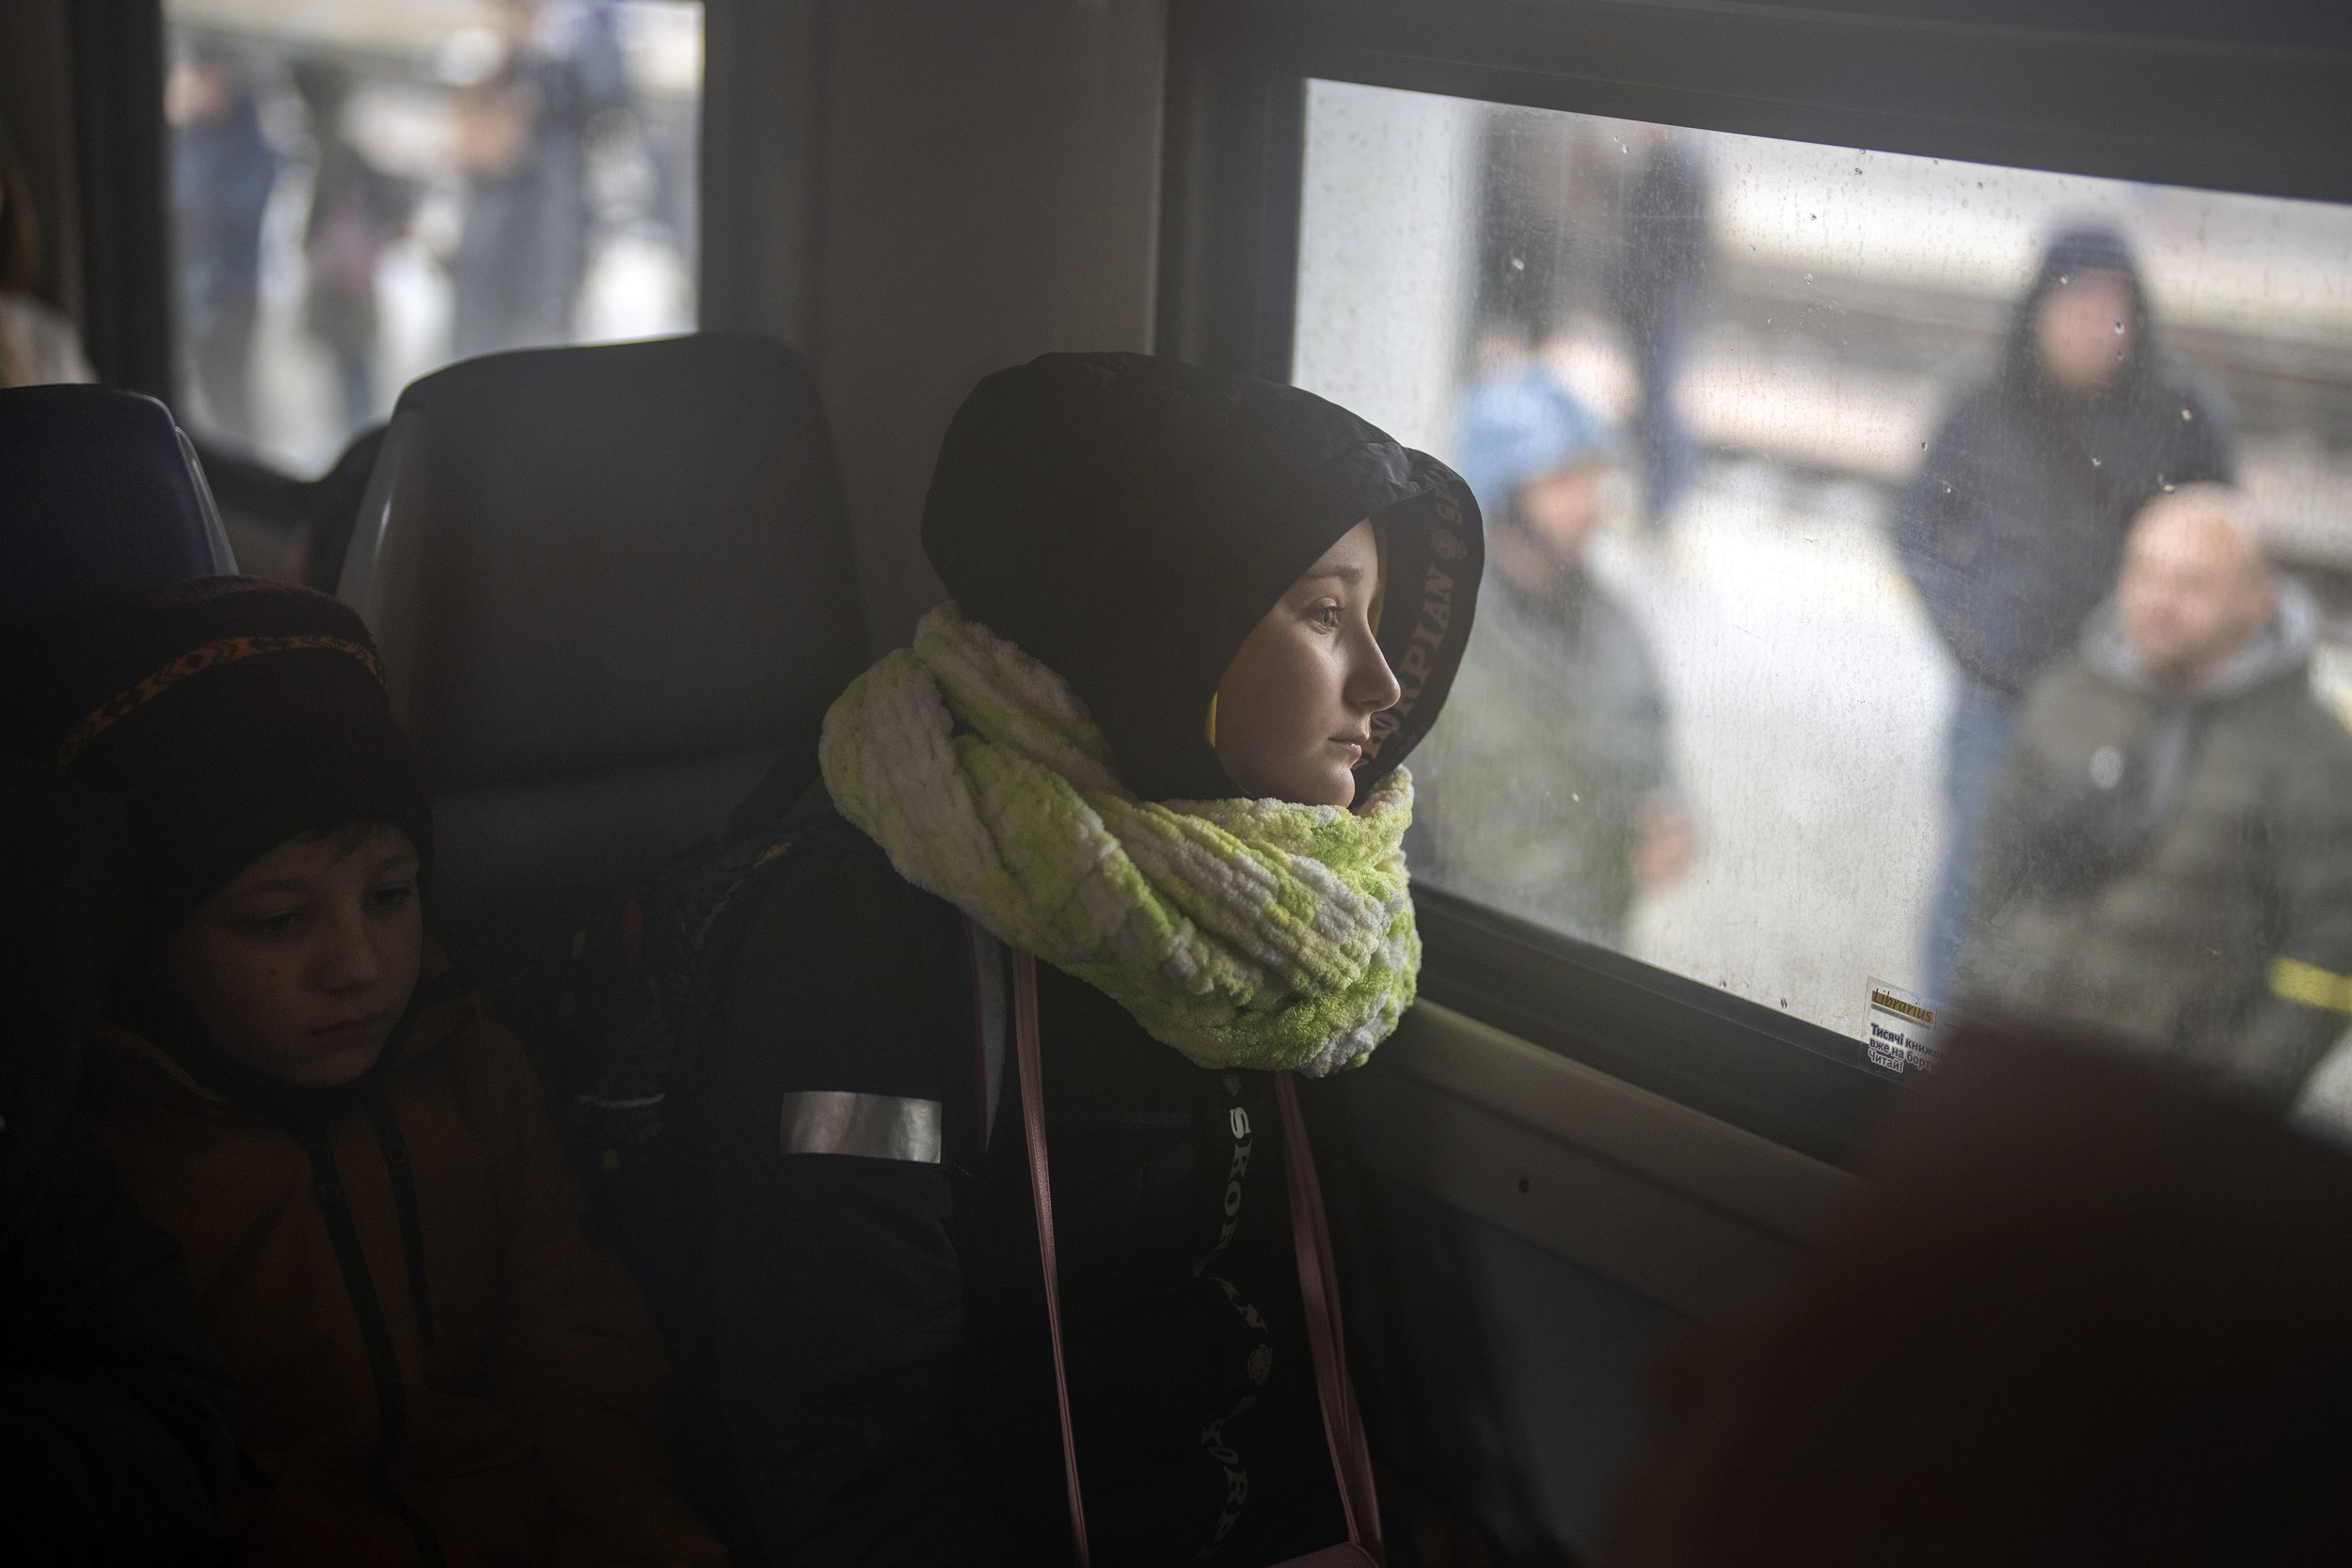  A girl and her brother sit on a train bound for Lviv at the Kyiv station, Ukraine, Thursday, March 3, 2022. (AP Photo/Emilio Morenatti) 